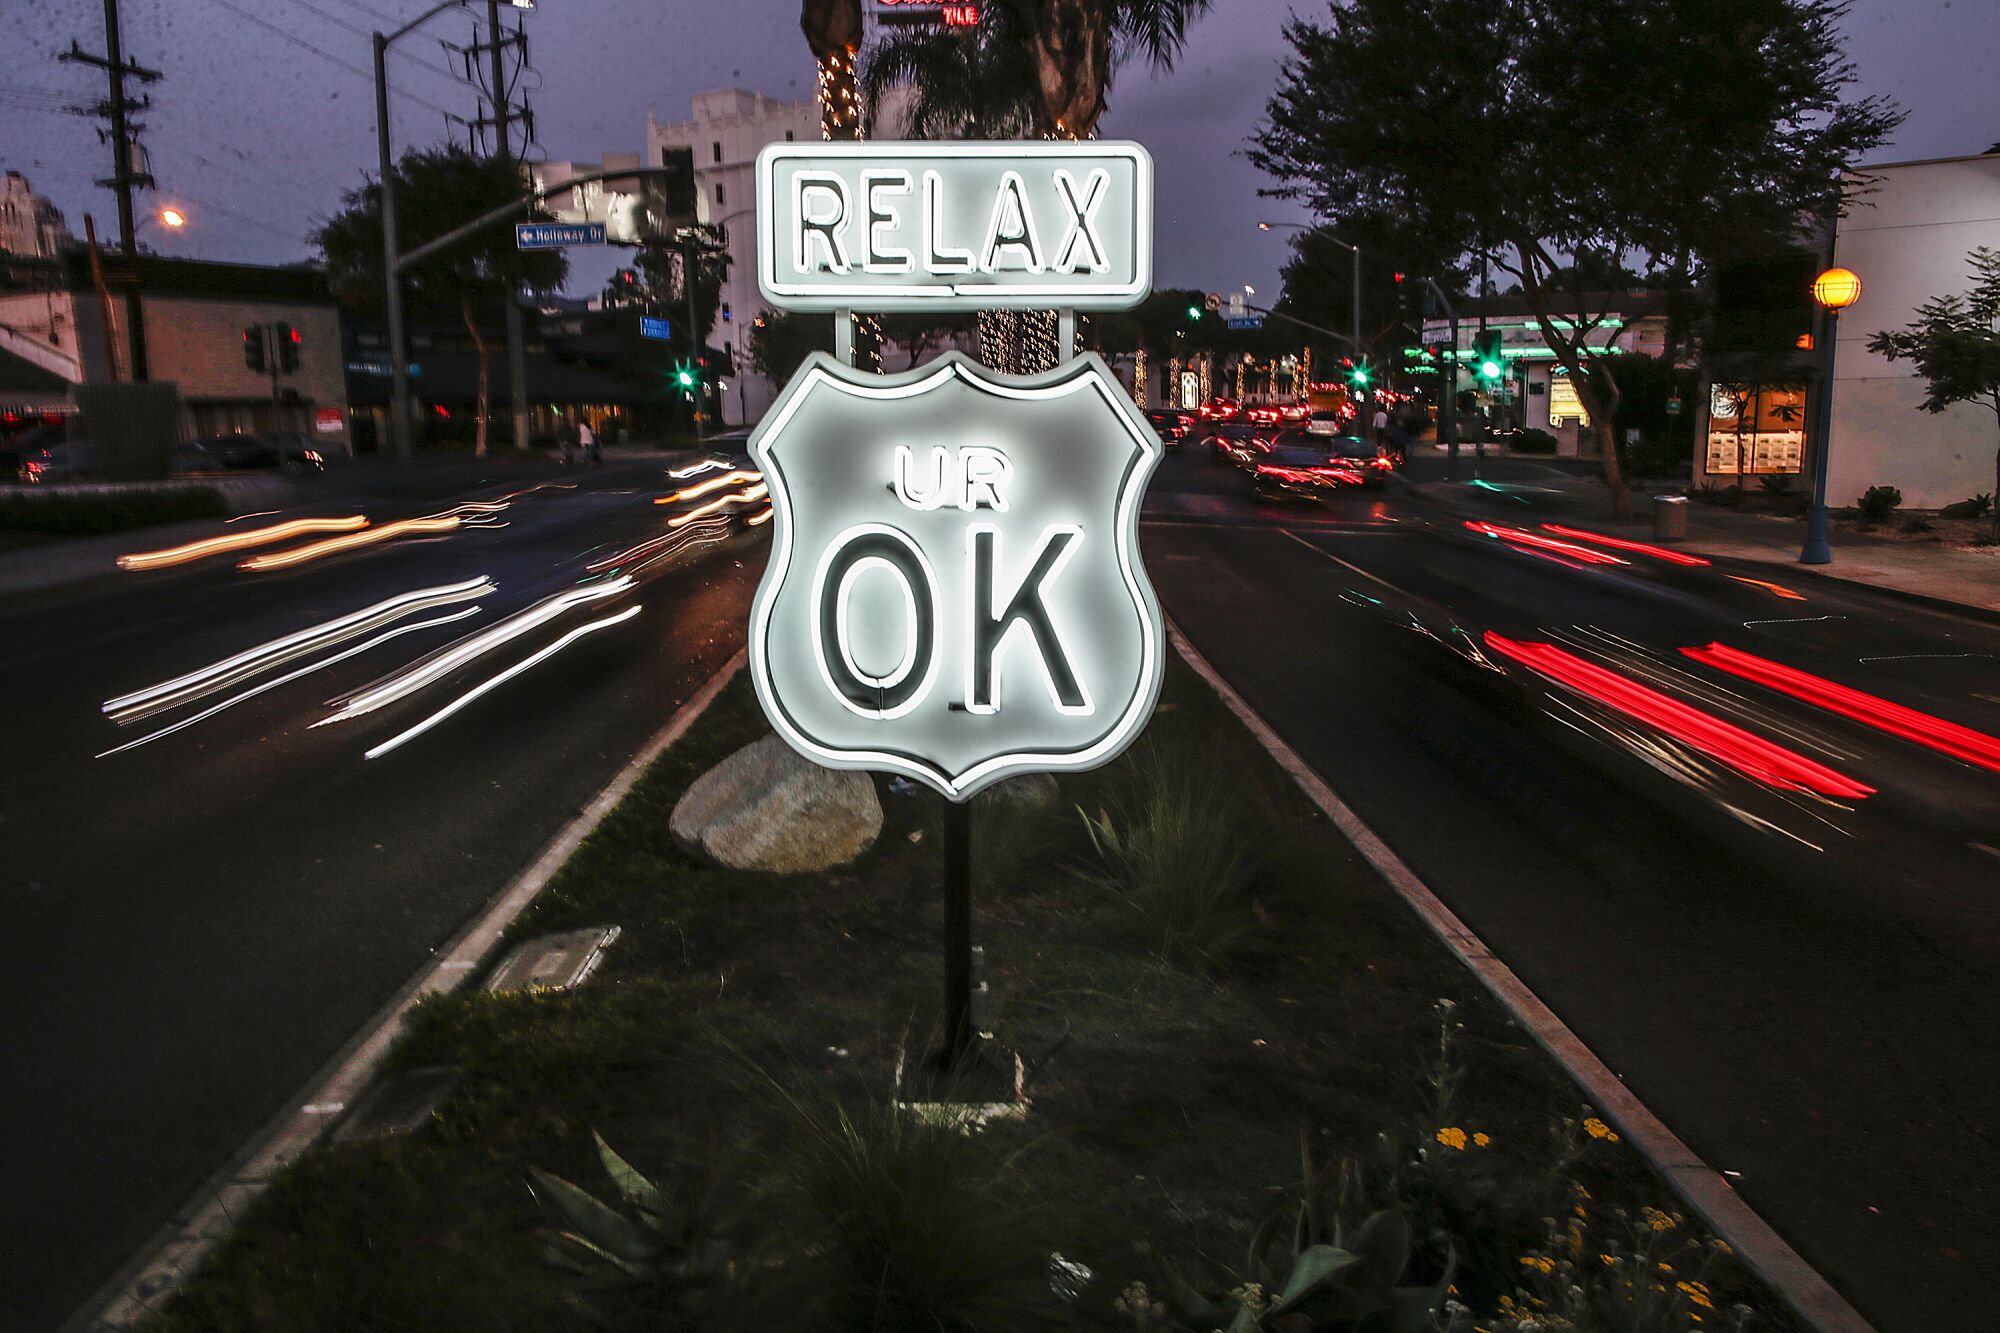 A neon sign in the shape of a highway shield on a median says Relax you're OK